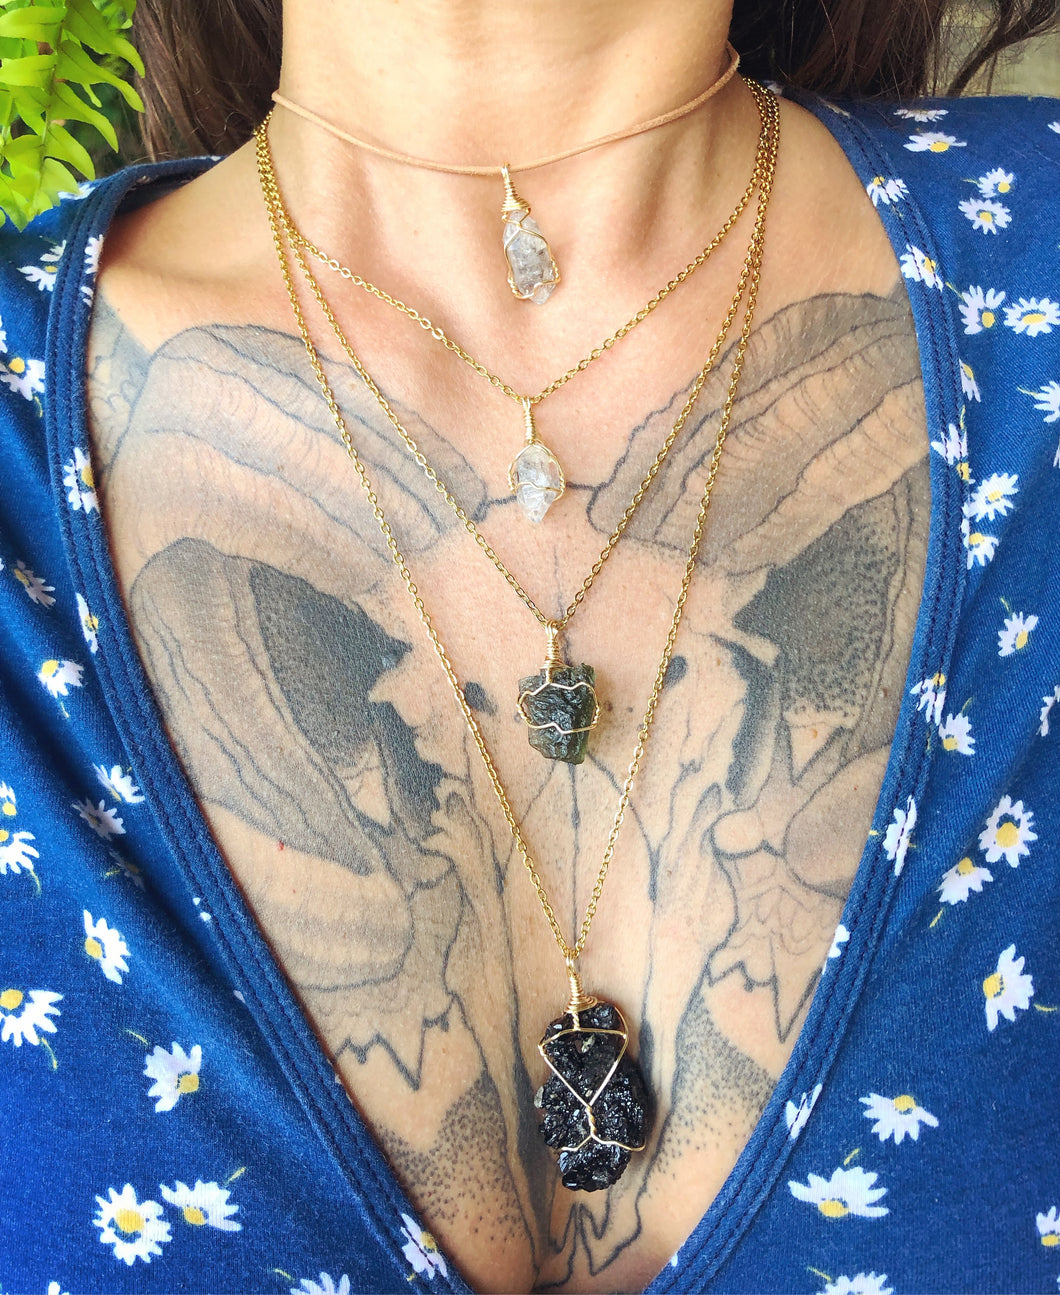 One herkimer diamond choker, one herkimer diamond necklace, one tourmaline necklace and one moldavite necklace all on gold chains layered over ram skull chest tattoo. Ferns hanging in the backgorund.